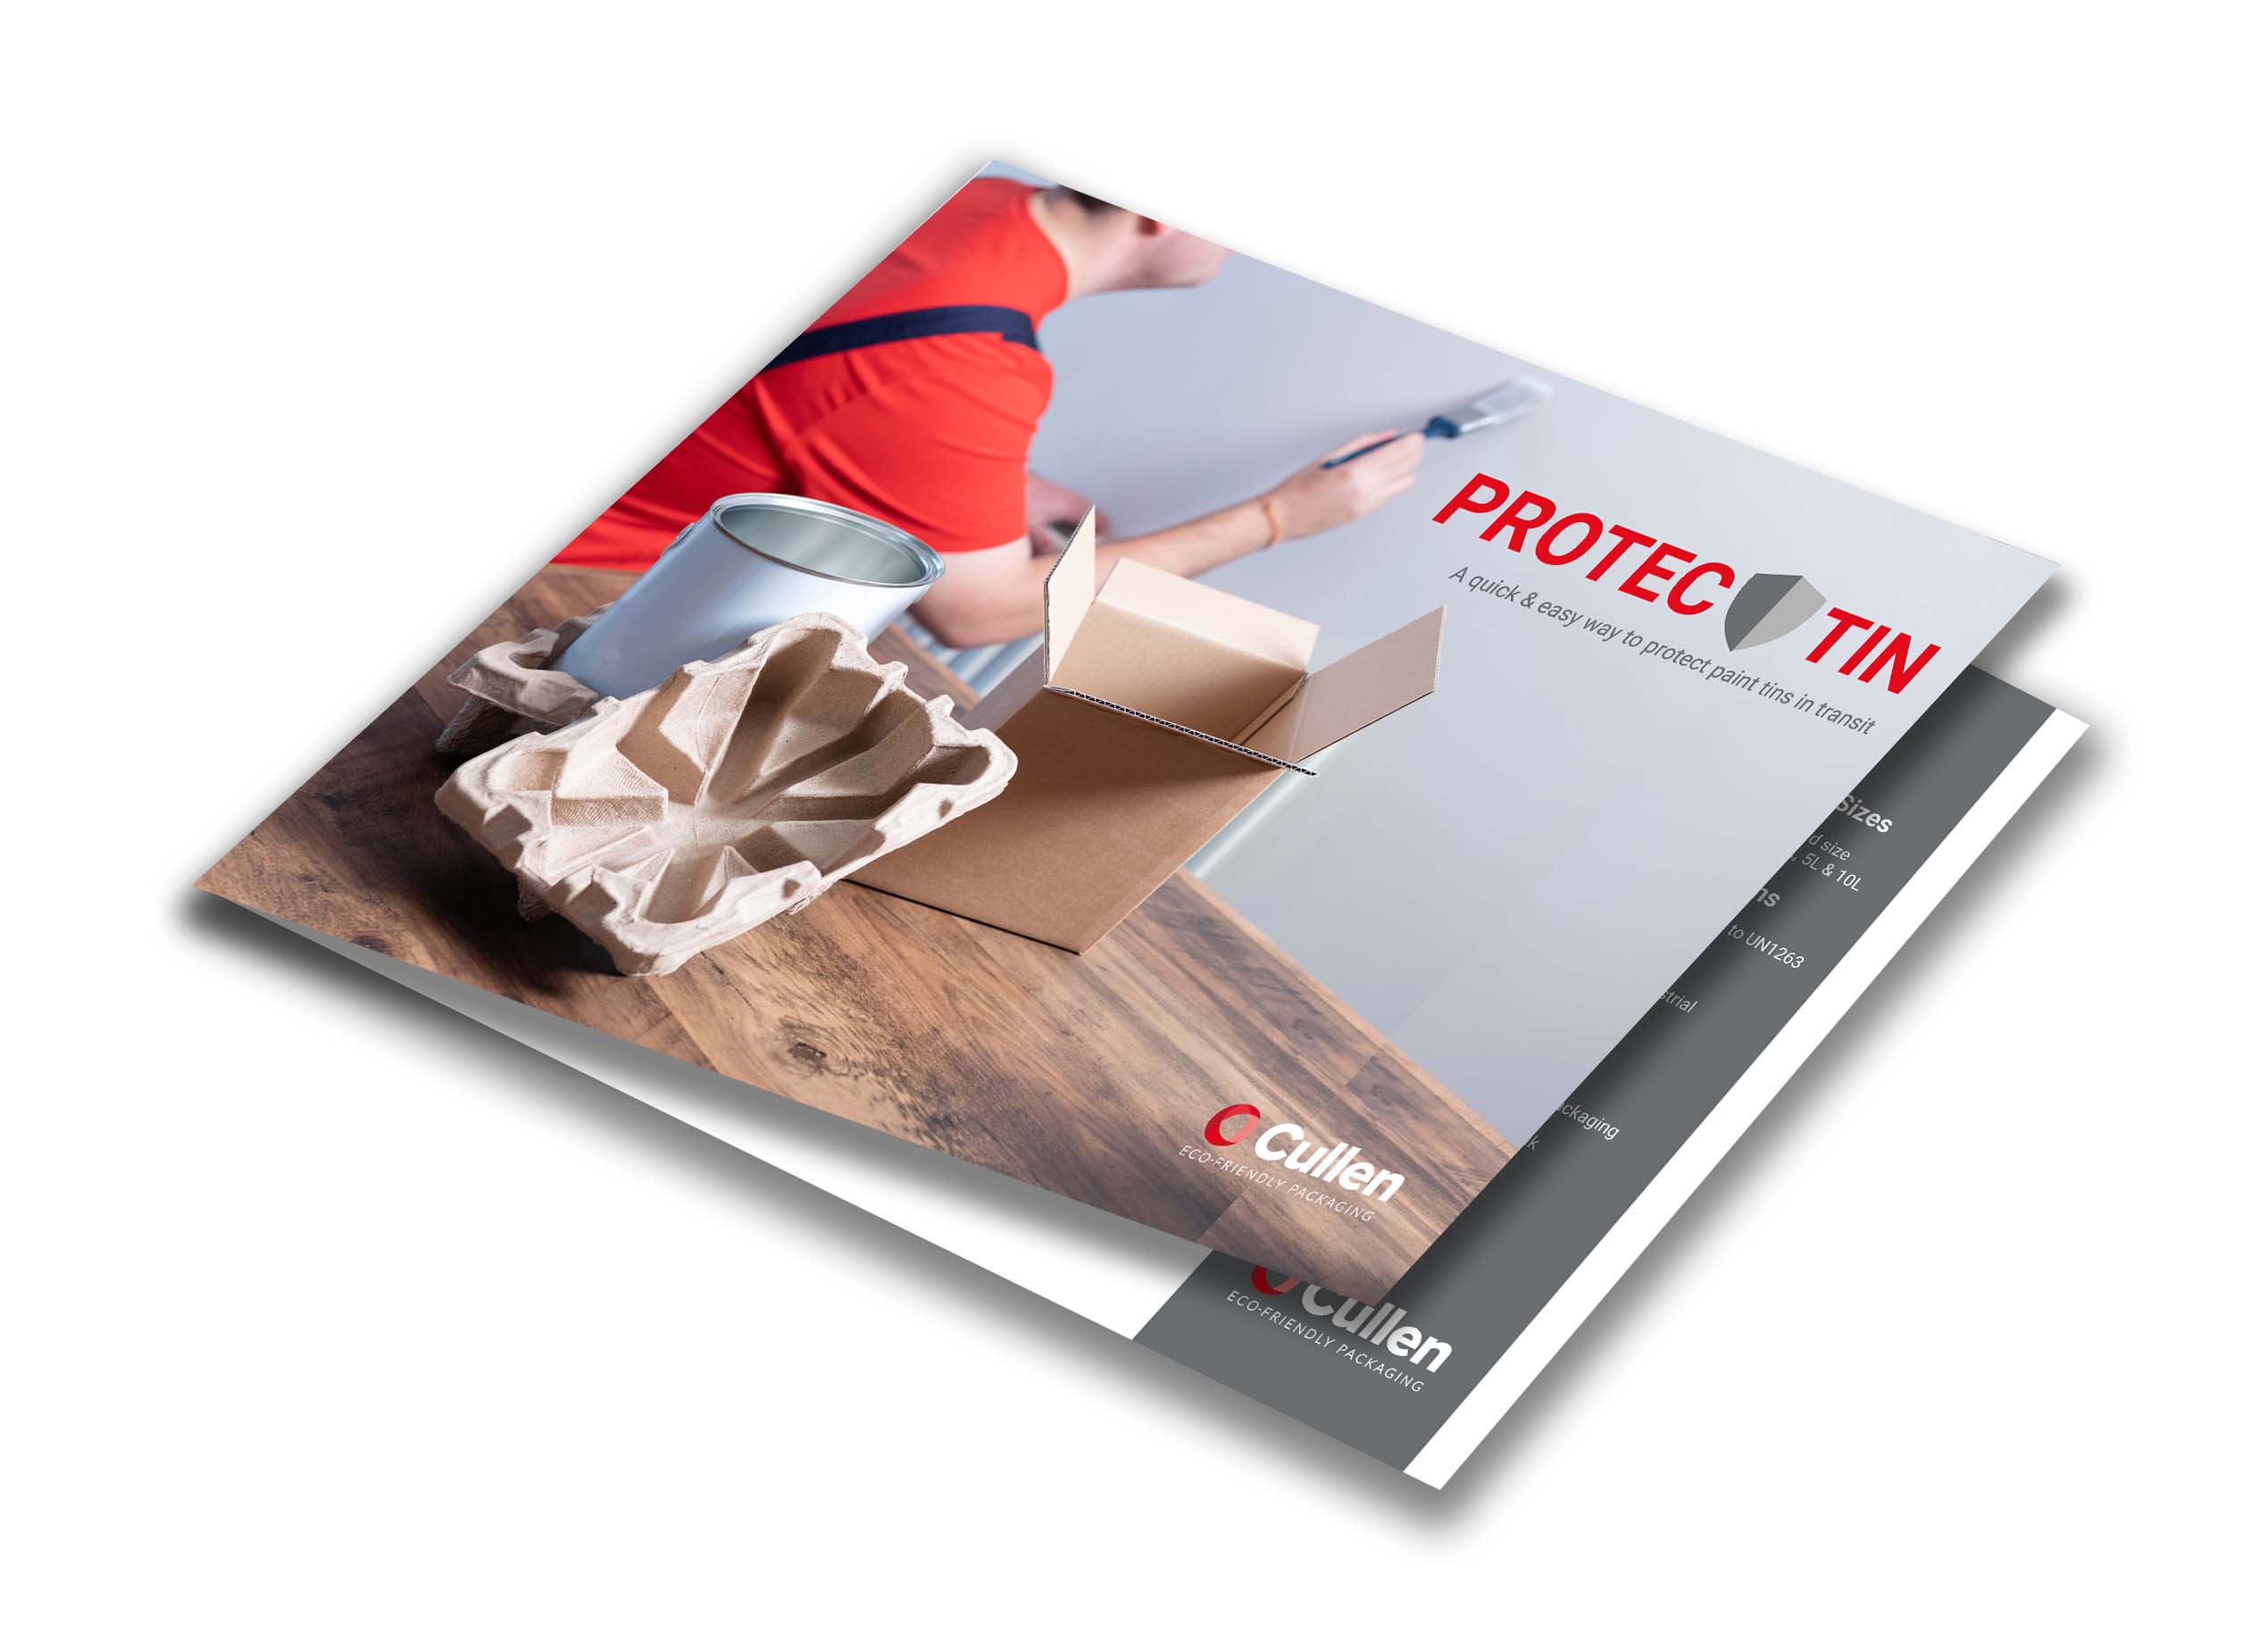 DOWNLOAD OUR PROTECTIN BROCHURE CTA Image